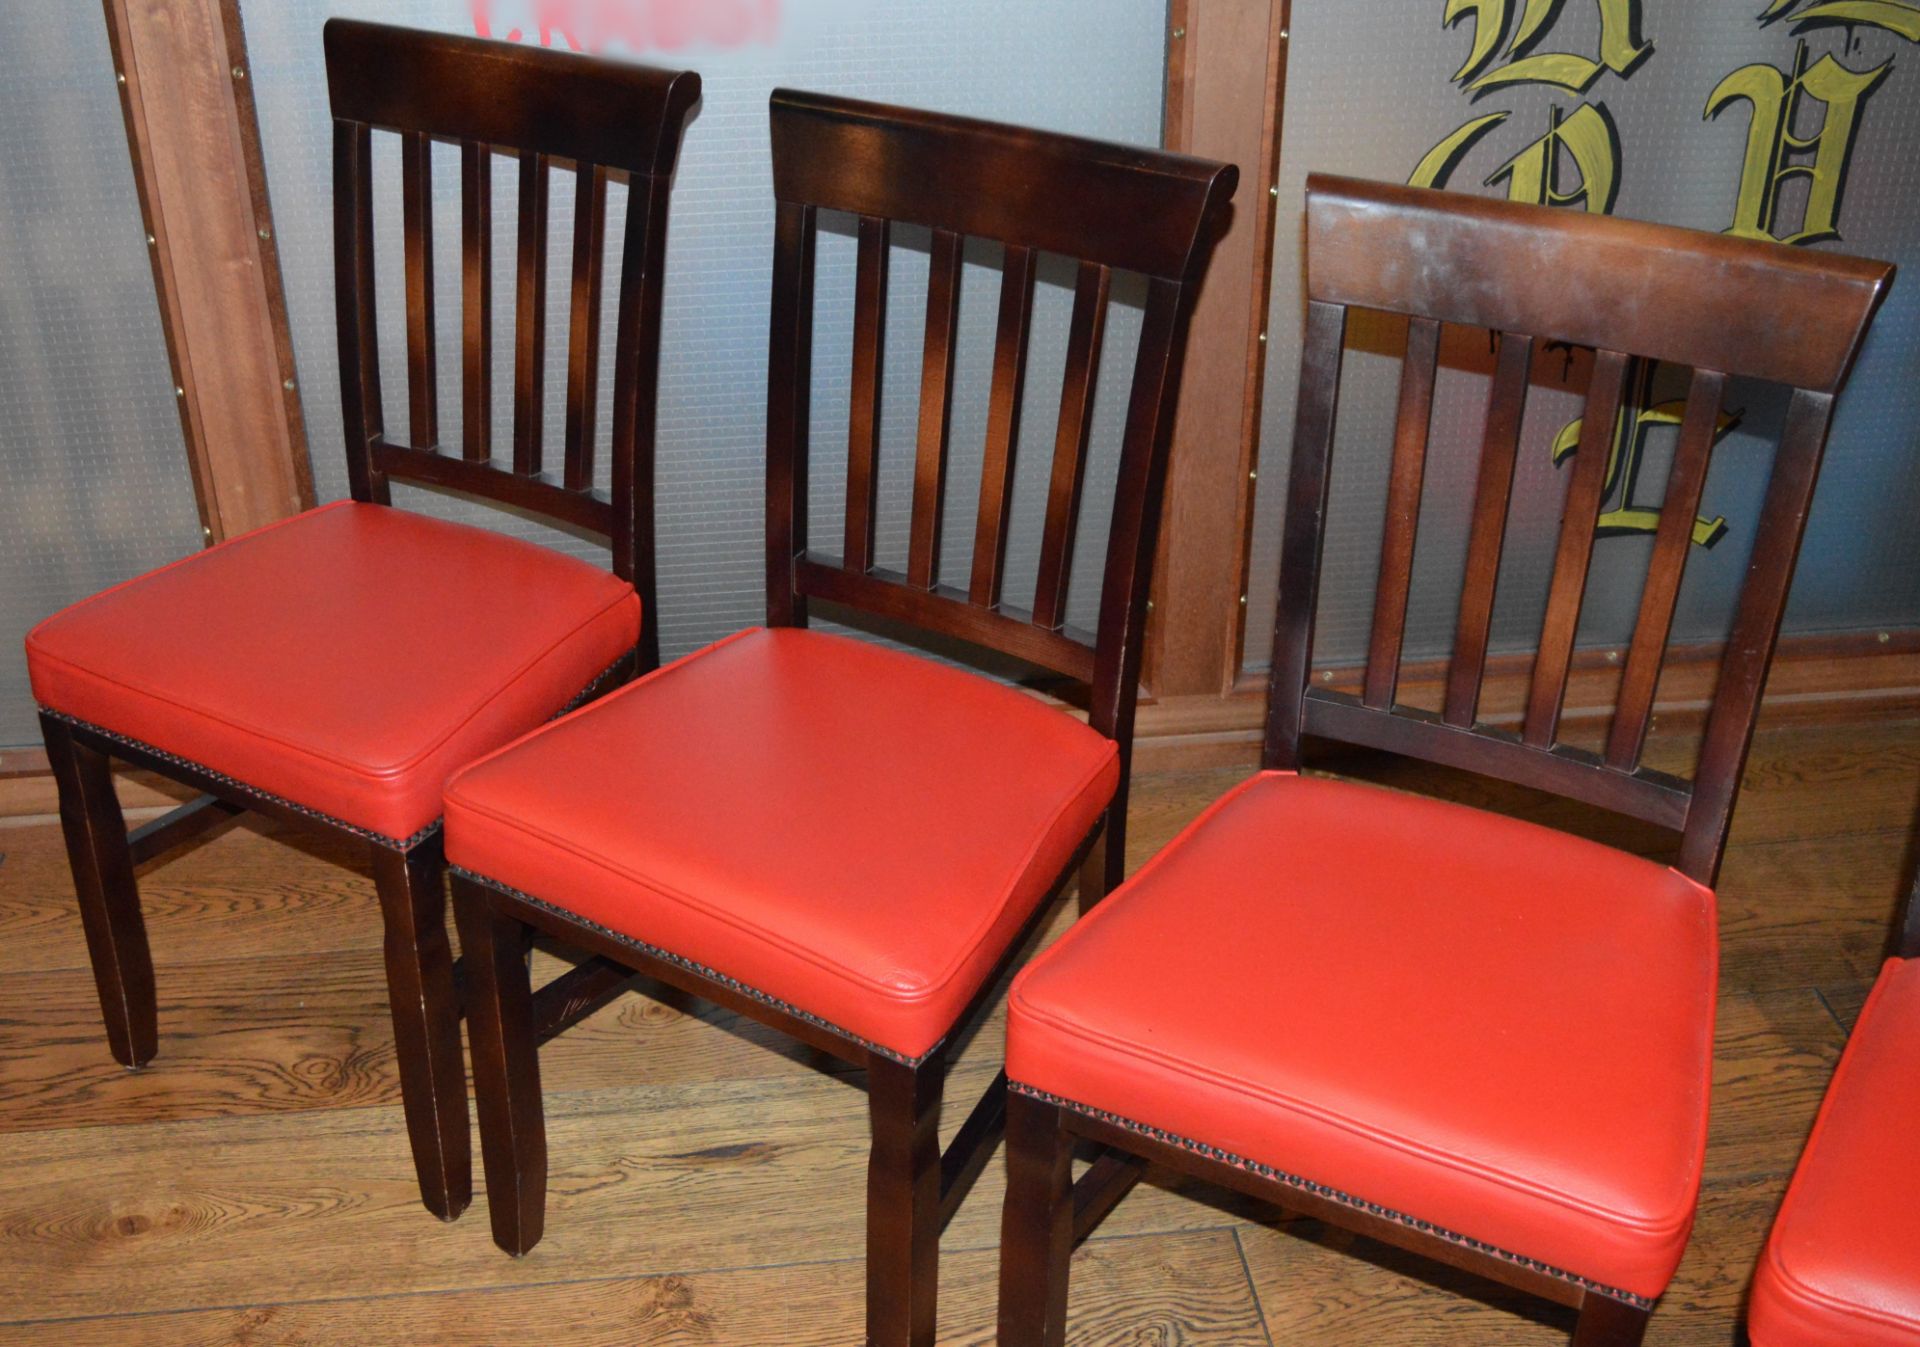 4 x Harley Chairs With Hardwoord Frames - Height 90 x Width 44 x Depth 39 cms - Seat Height 48 cms - Image 3 of 5